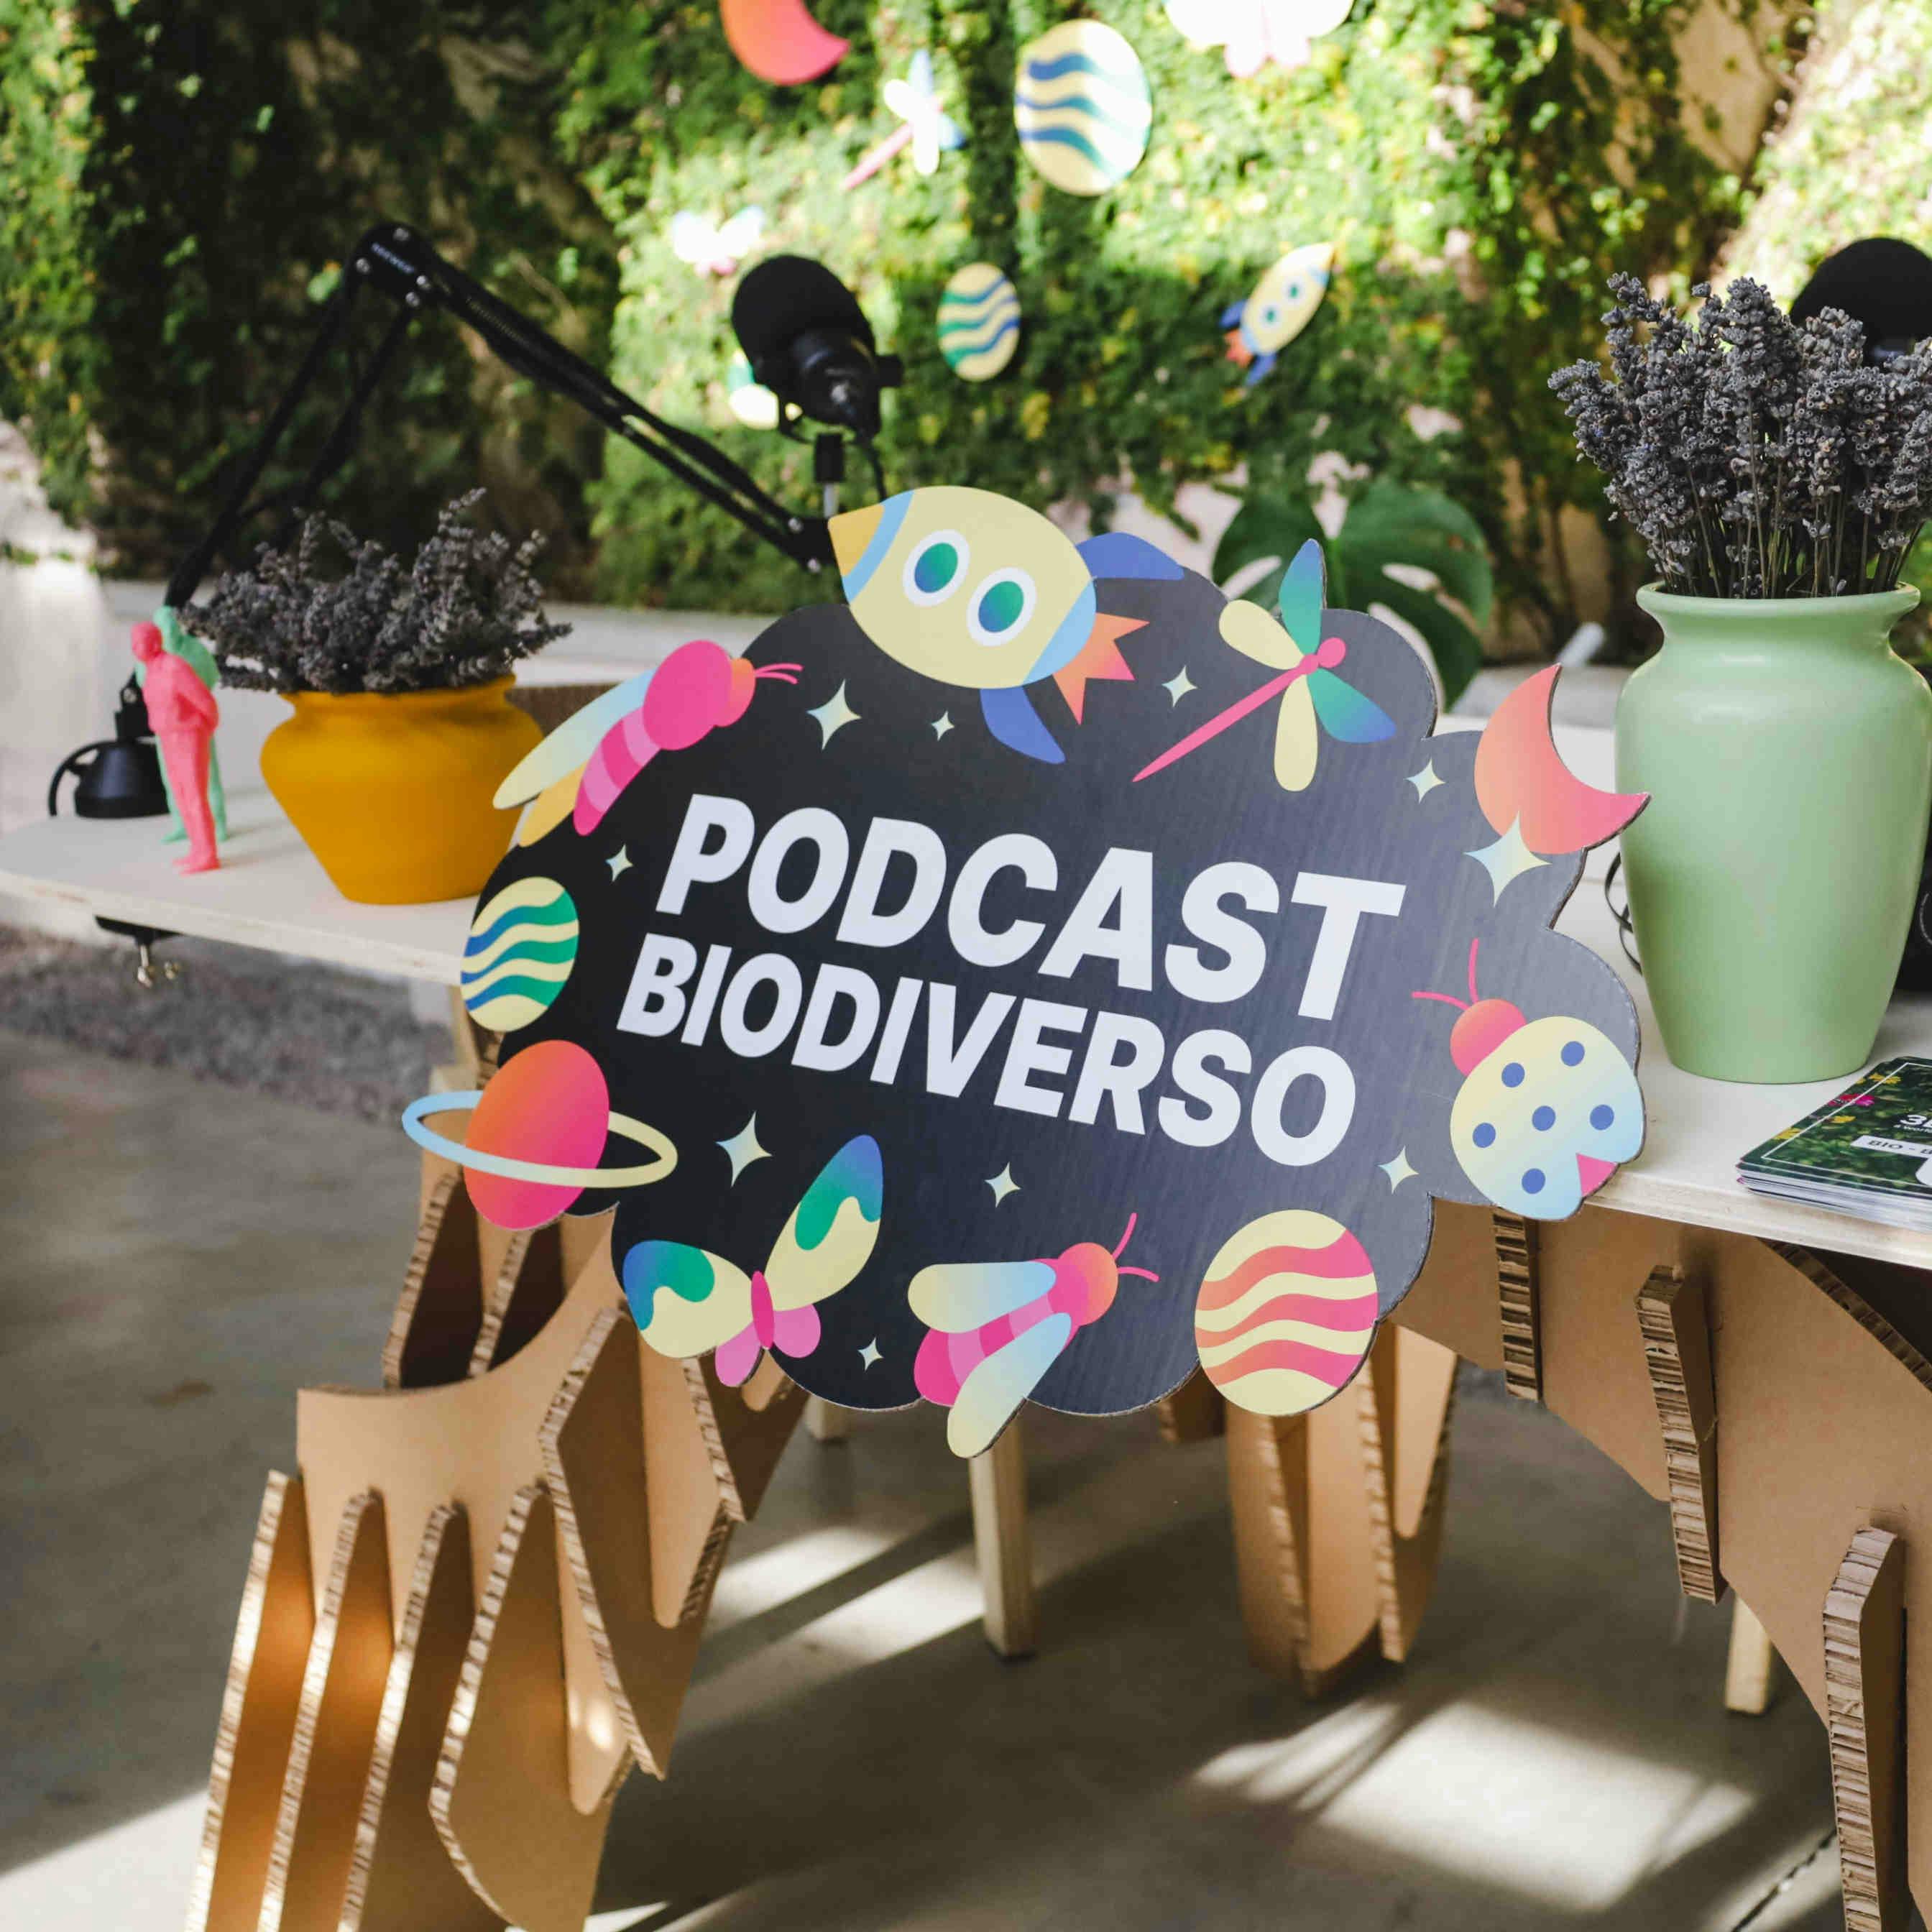 Biodiverse podcast: episodes and guests